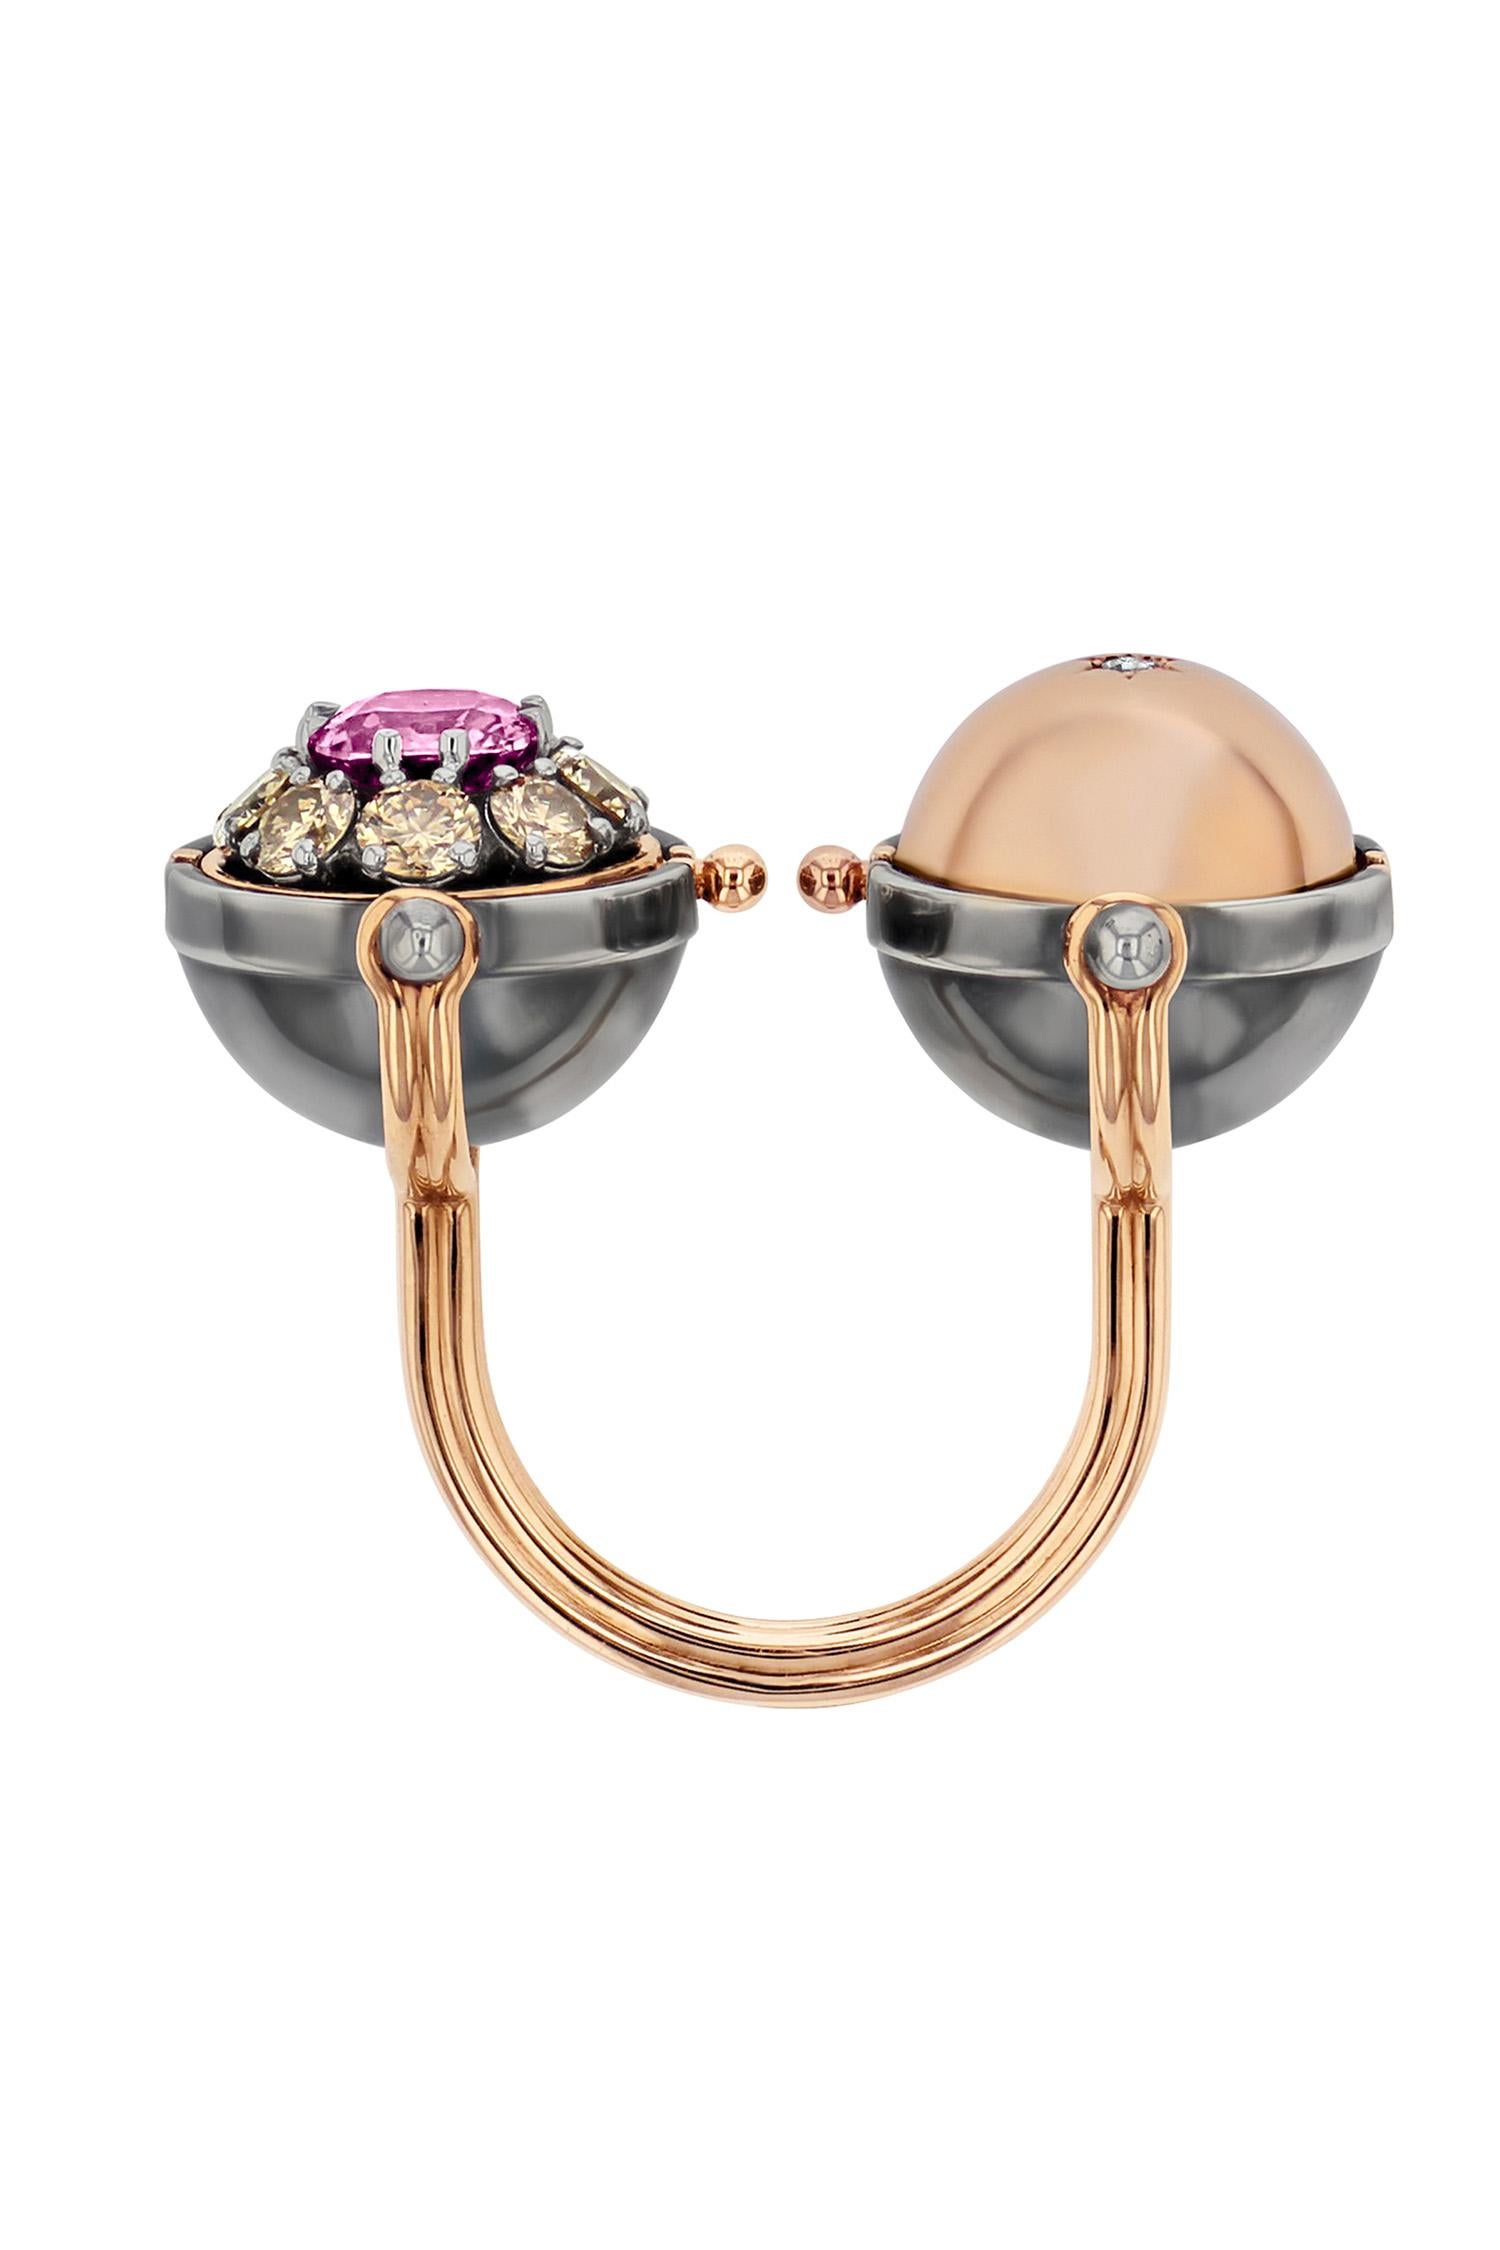 Neoclassical Pink Sapphire & Diamonds Sirius Toi&Moi Ring in 18k Rose Gold by Elie Top For Sale